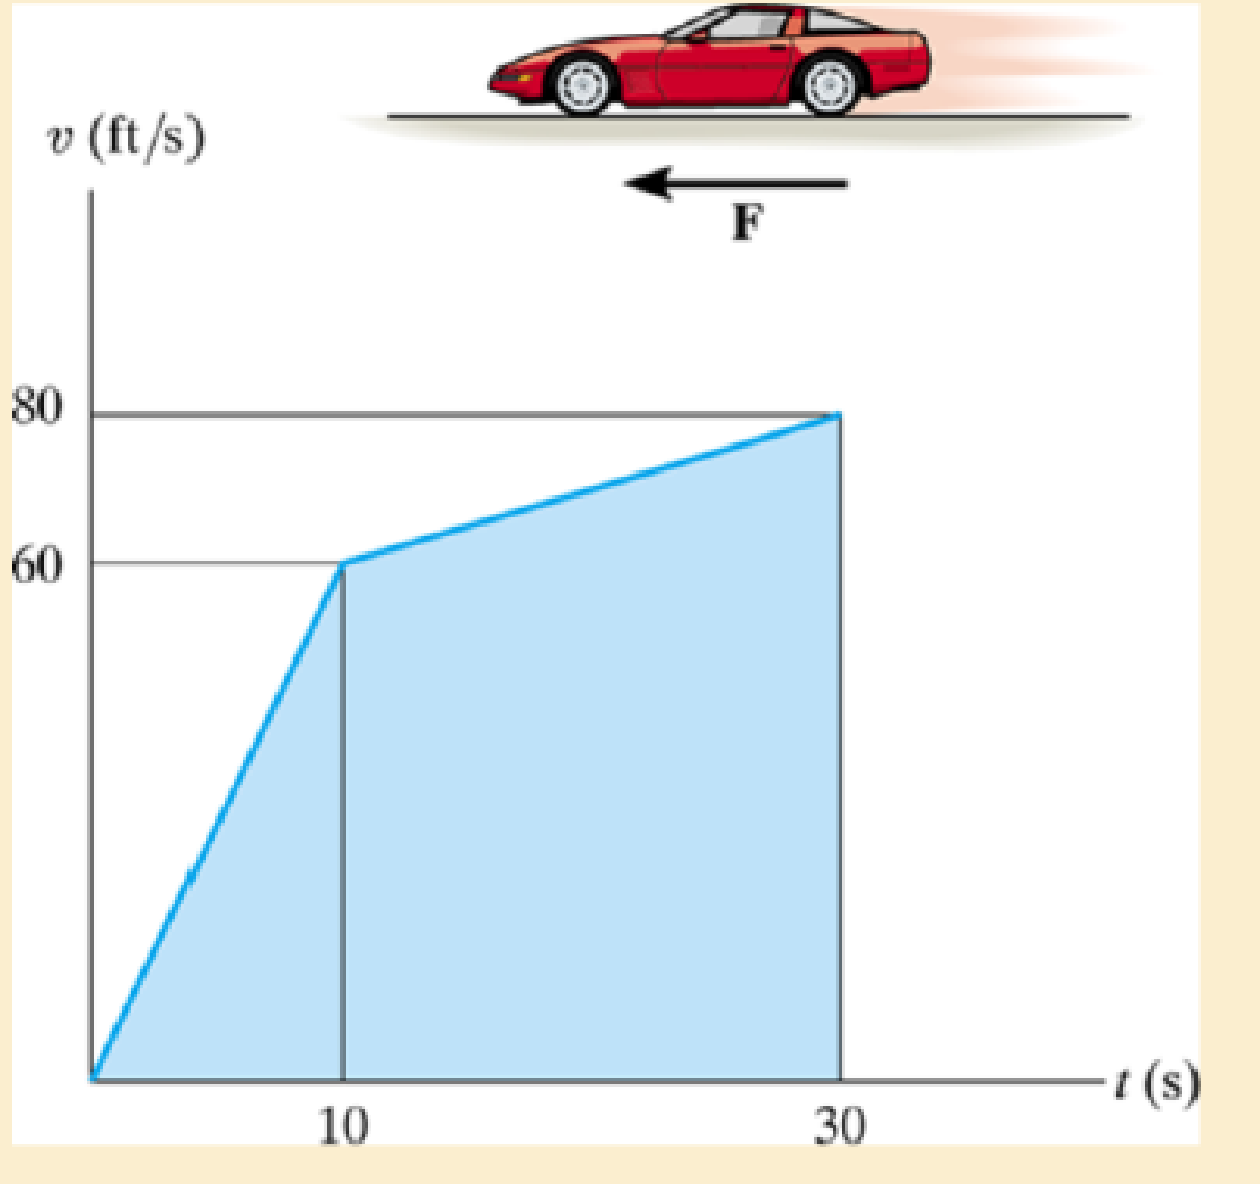 Chapter 13.4, Problem 8P, The speed of the 3500-lb sports car is plotted over the 30-s time period. Plot the variation of the 